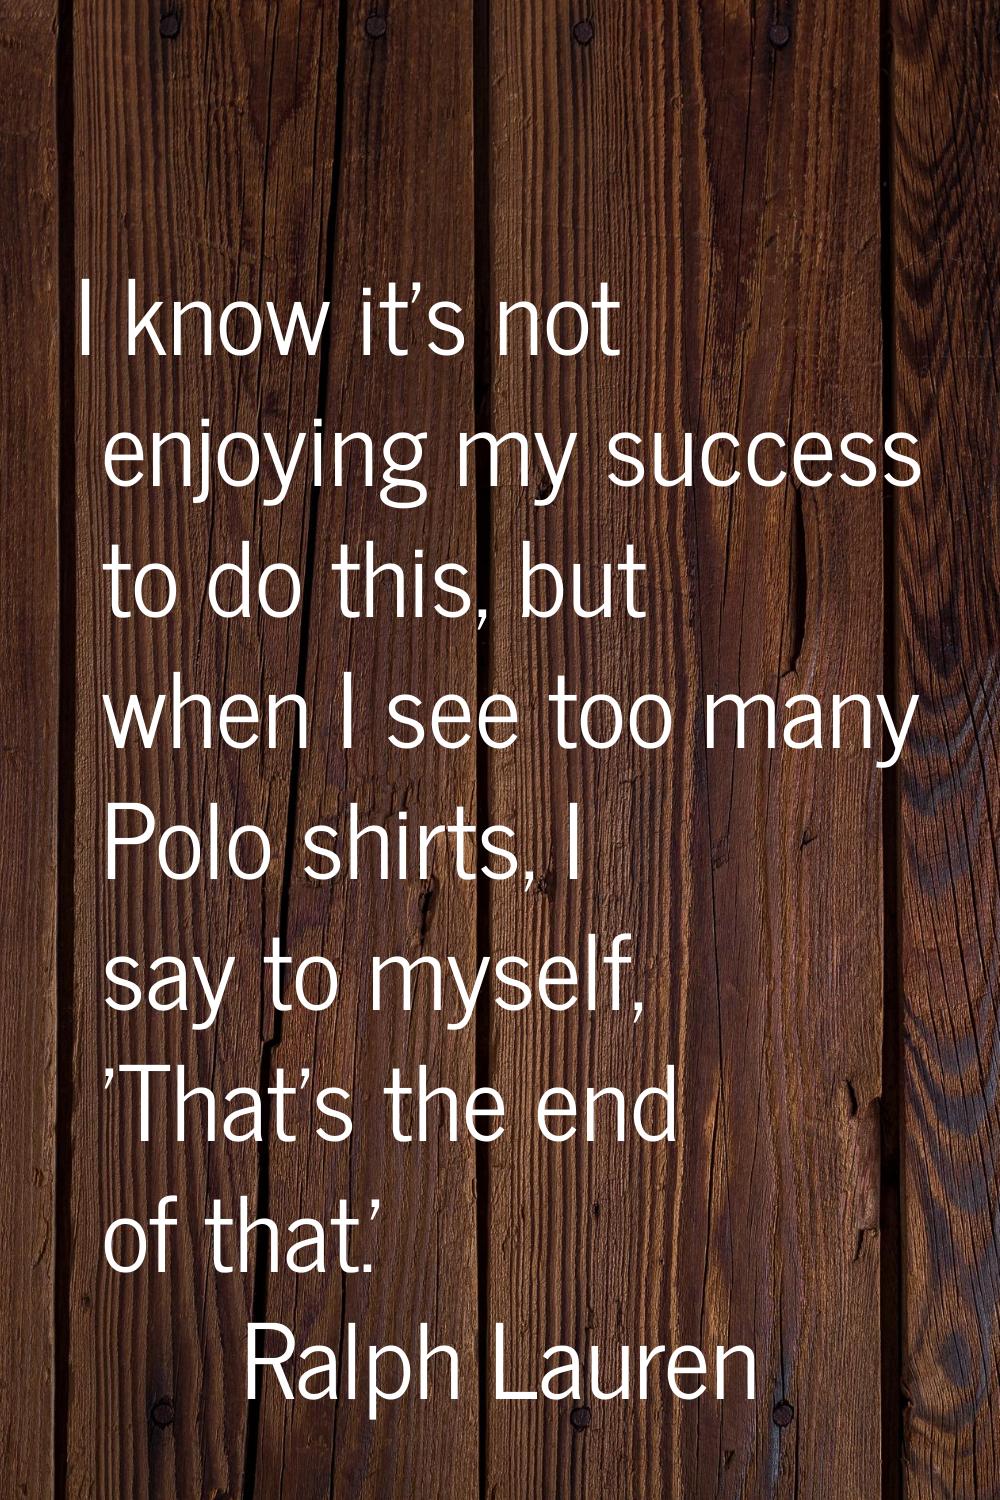 I know it's not enjoying my success to do this, but when I see too many Polo shirts, I say to mysel